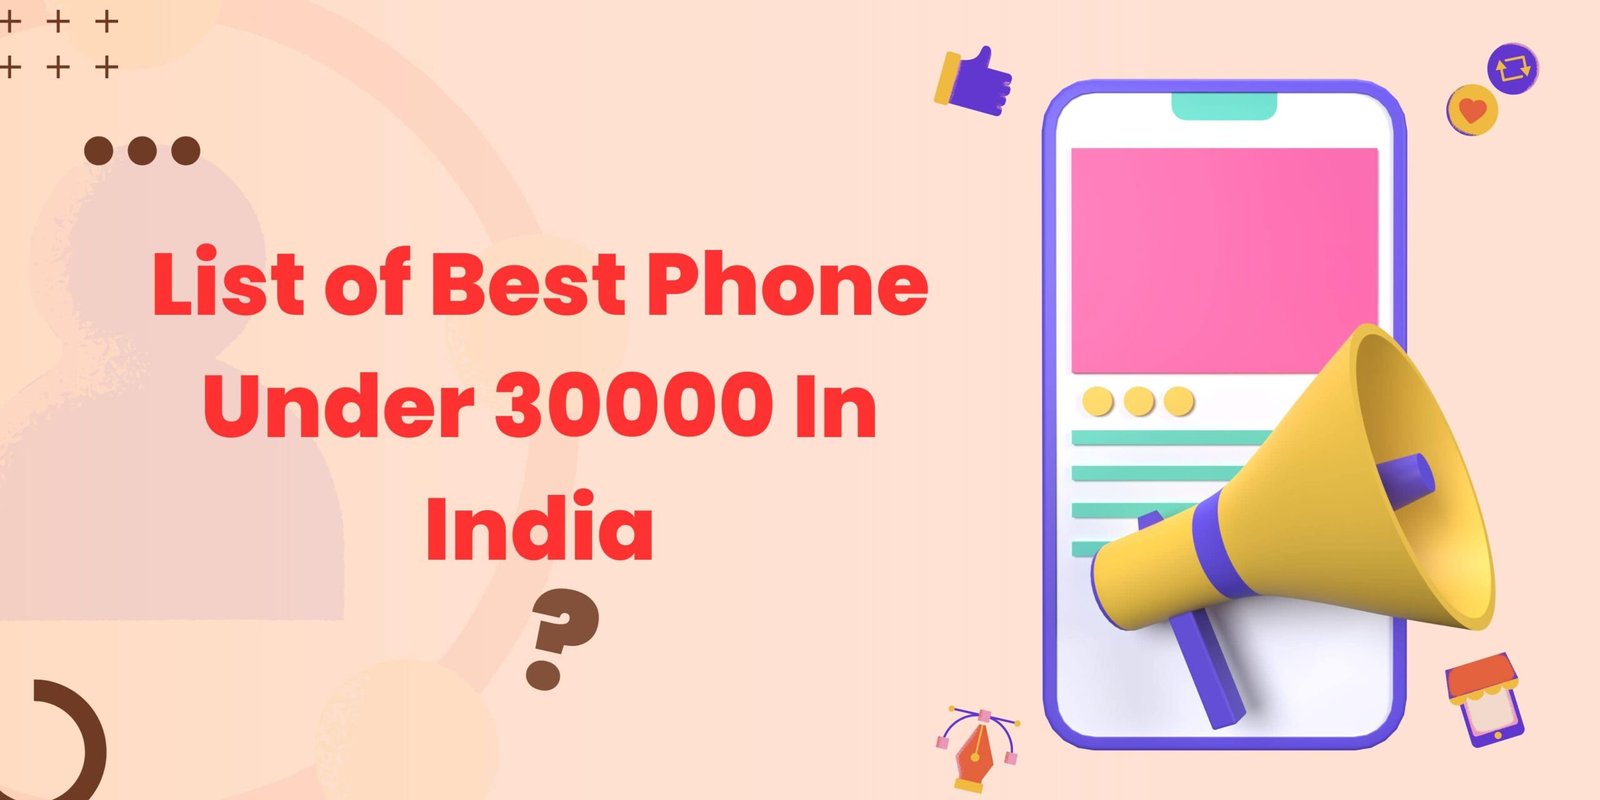 List of Best Phone Under 30000 In India